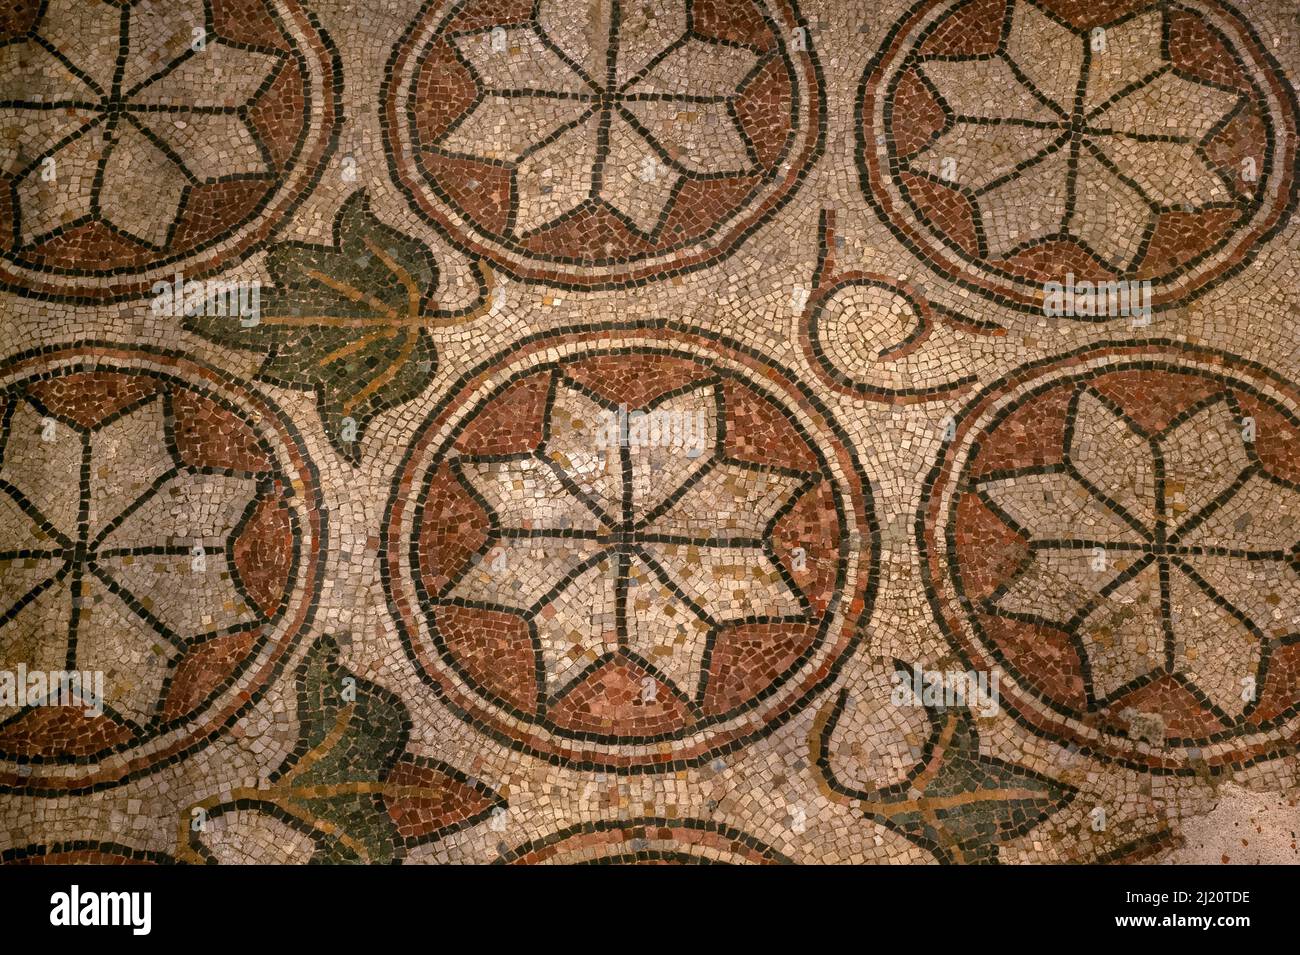 Circles surrounding eight-pointed stars.  Among decorative features of medieval mosaic in restored late-1000s or early 1100s pavement in former Benedictine abbey church at Sorde l'Abbaye, Landes, Nouvelle-Aquitaine, France. Stock Photo